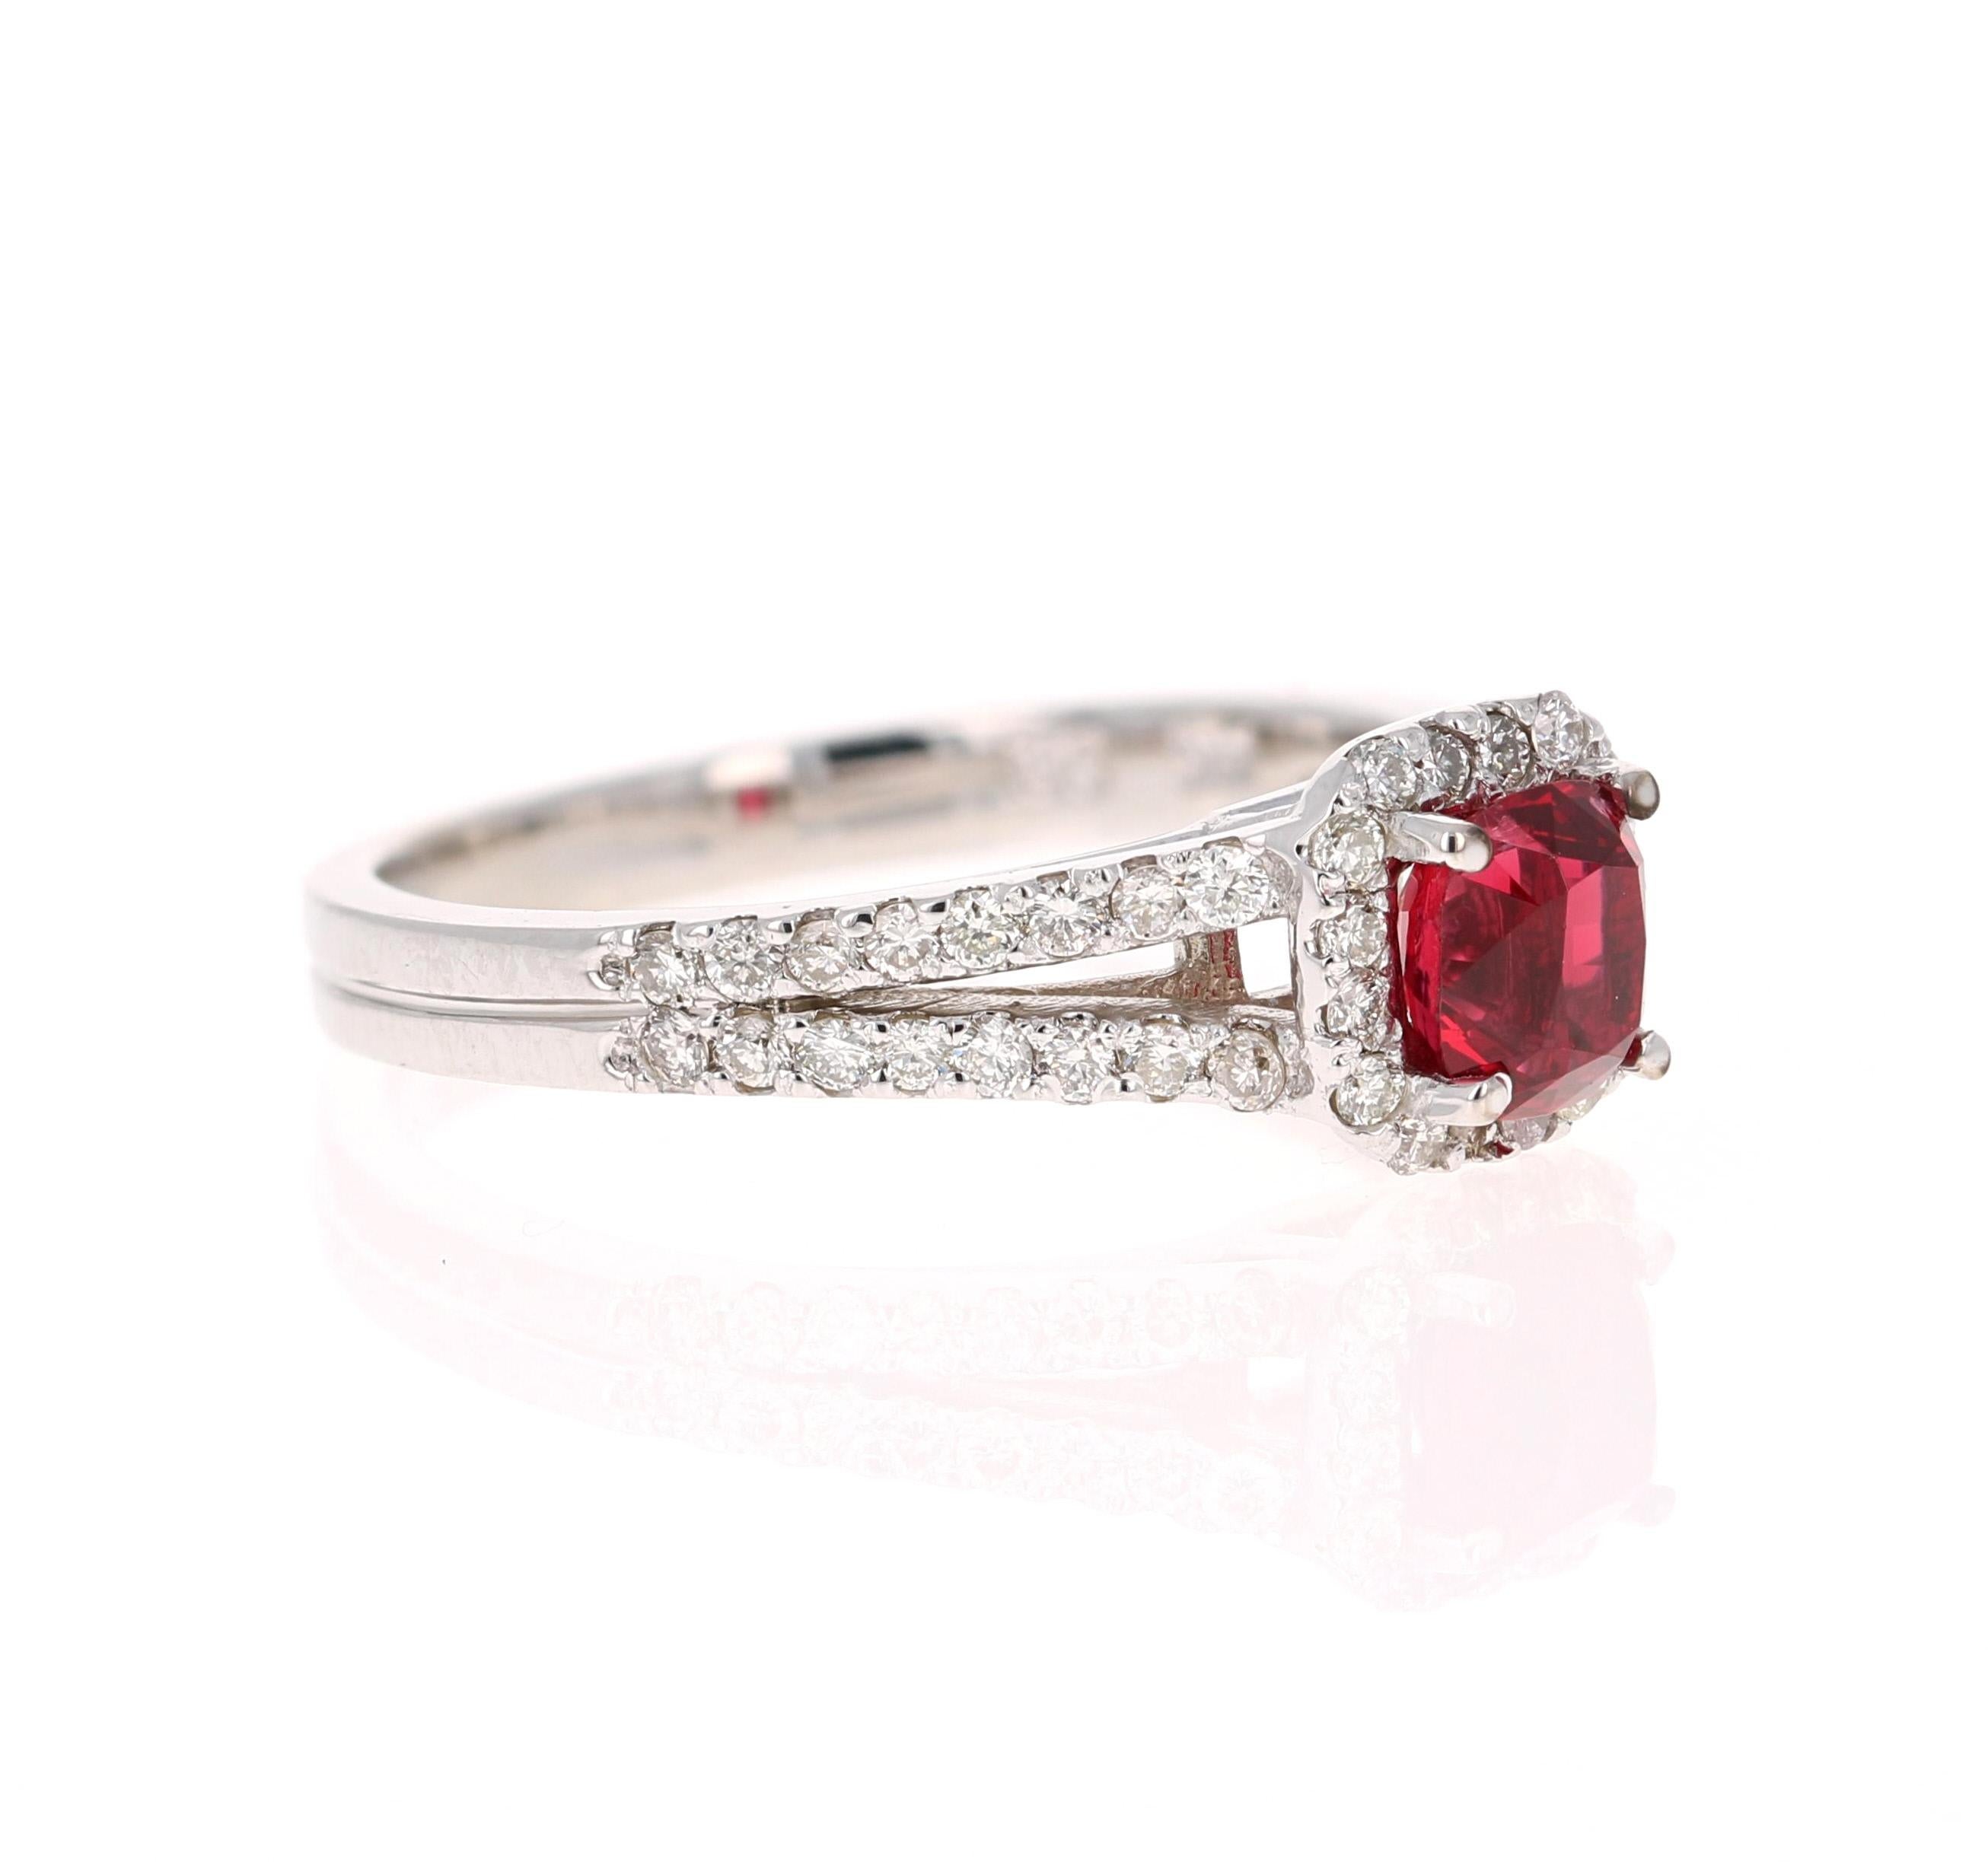 This ring has a gorgeous natural Cushion Cut Red Spinel that weighs 0.88 carats and is surrounded by 48 Round Cut Diamonds that weigh 0.44 carats.  The Clarity and Color of the diamonds is VS2-H.  The total carat weight of the ring is 1.26